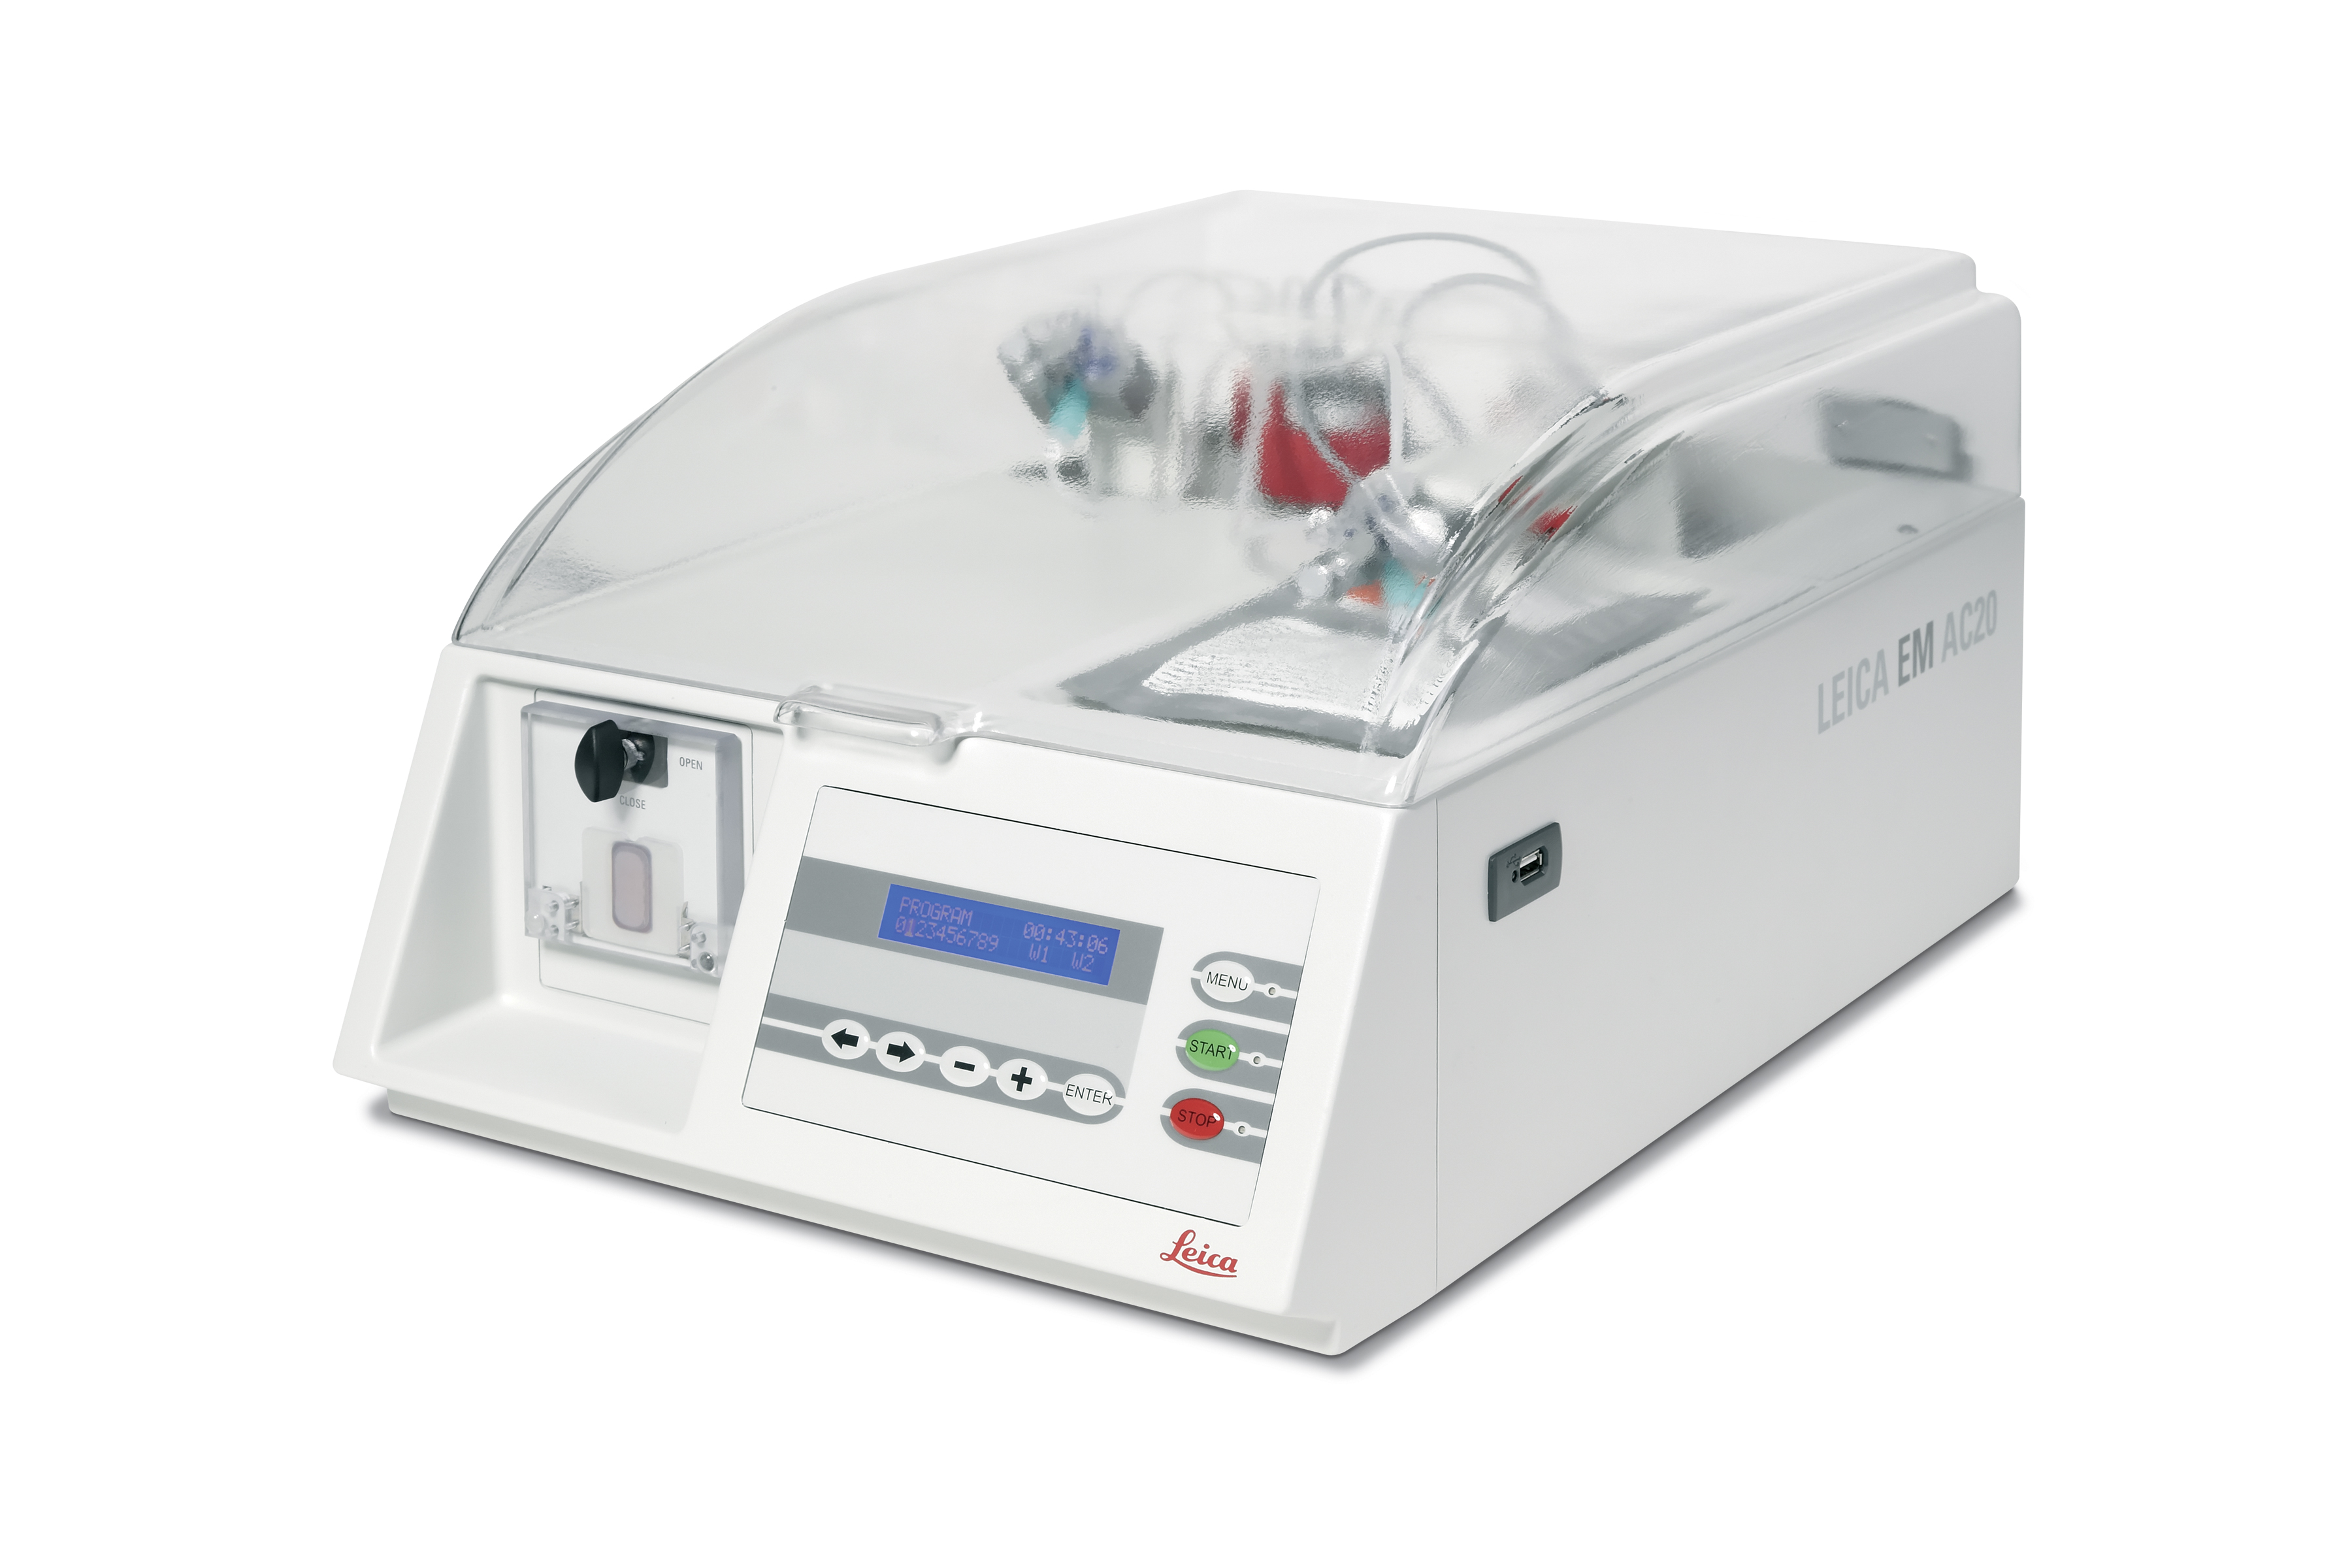 The Leica EM AC20 automatic contrasting instrument for ultrathin sections